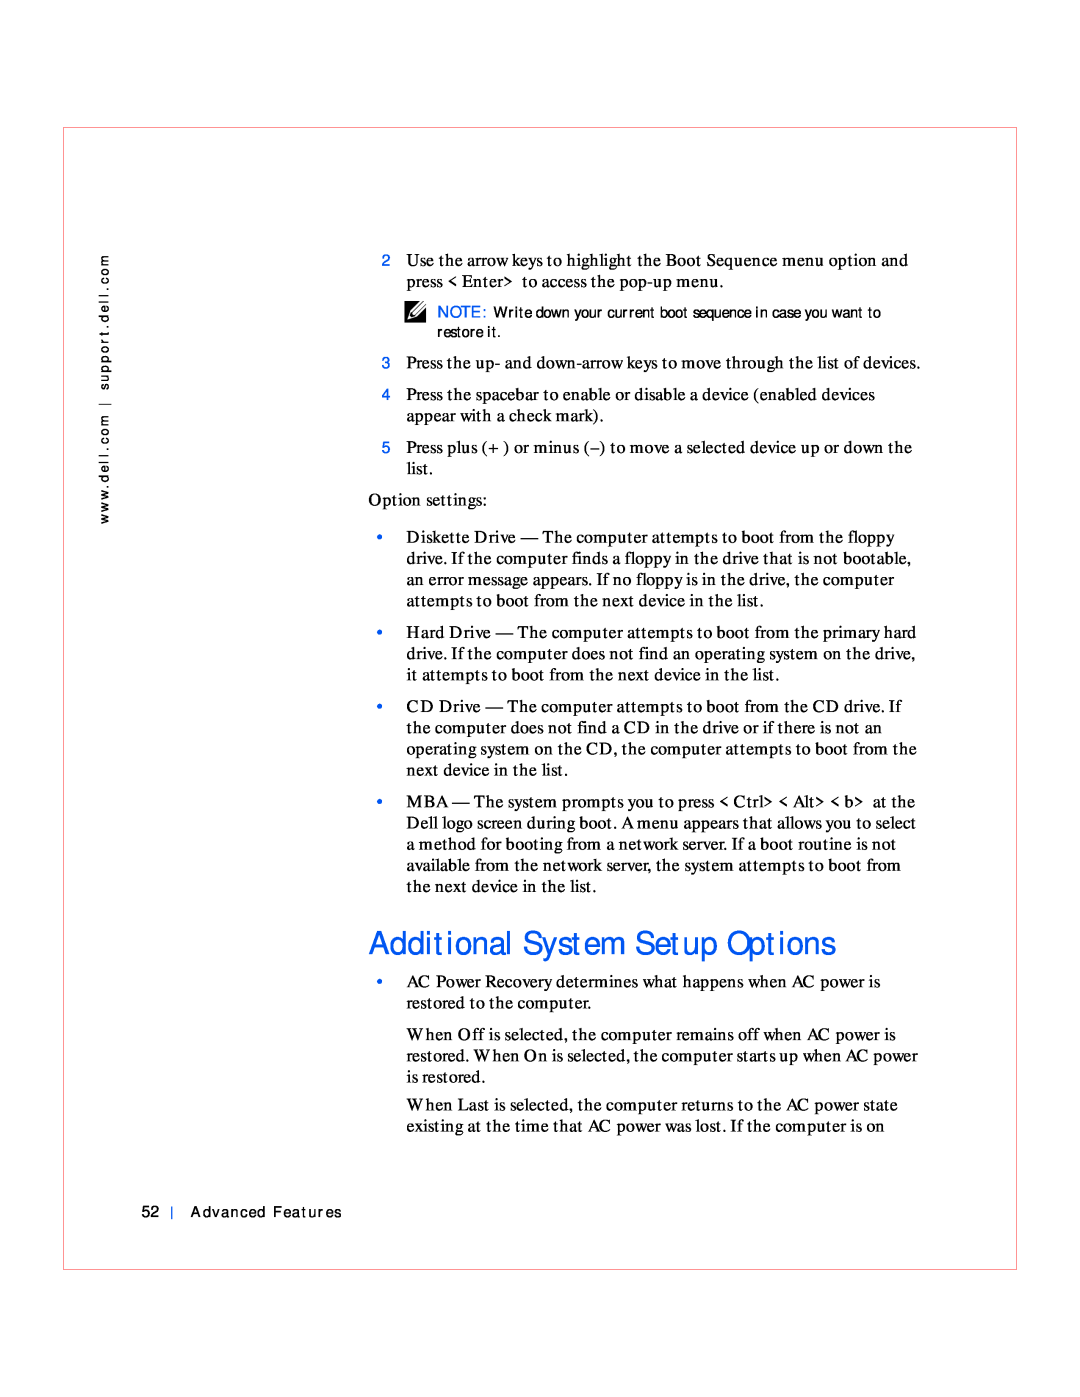 Dell GX240 manual Additional System Setup Options 